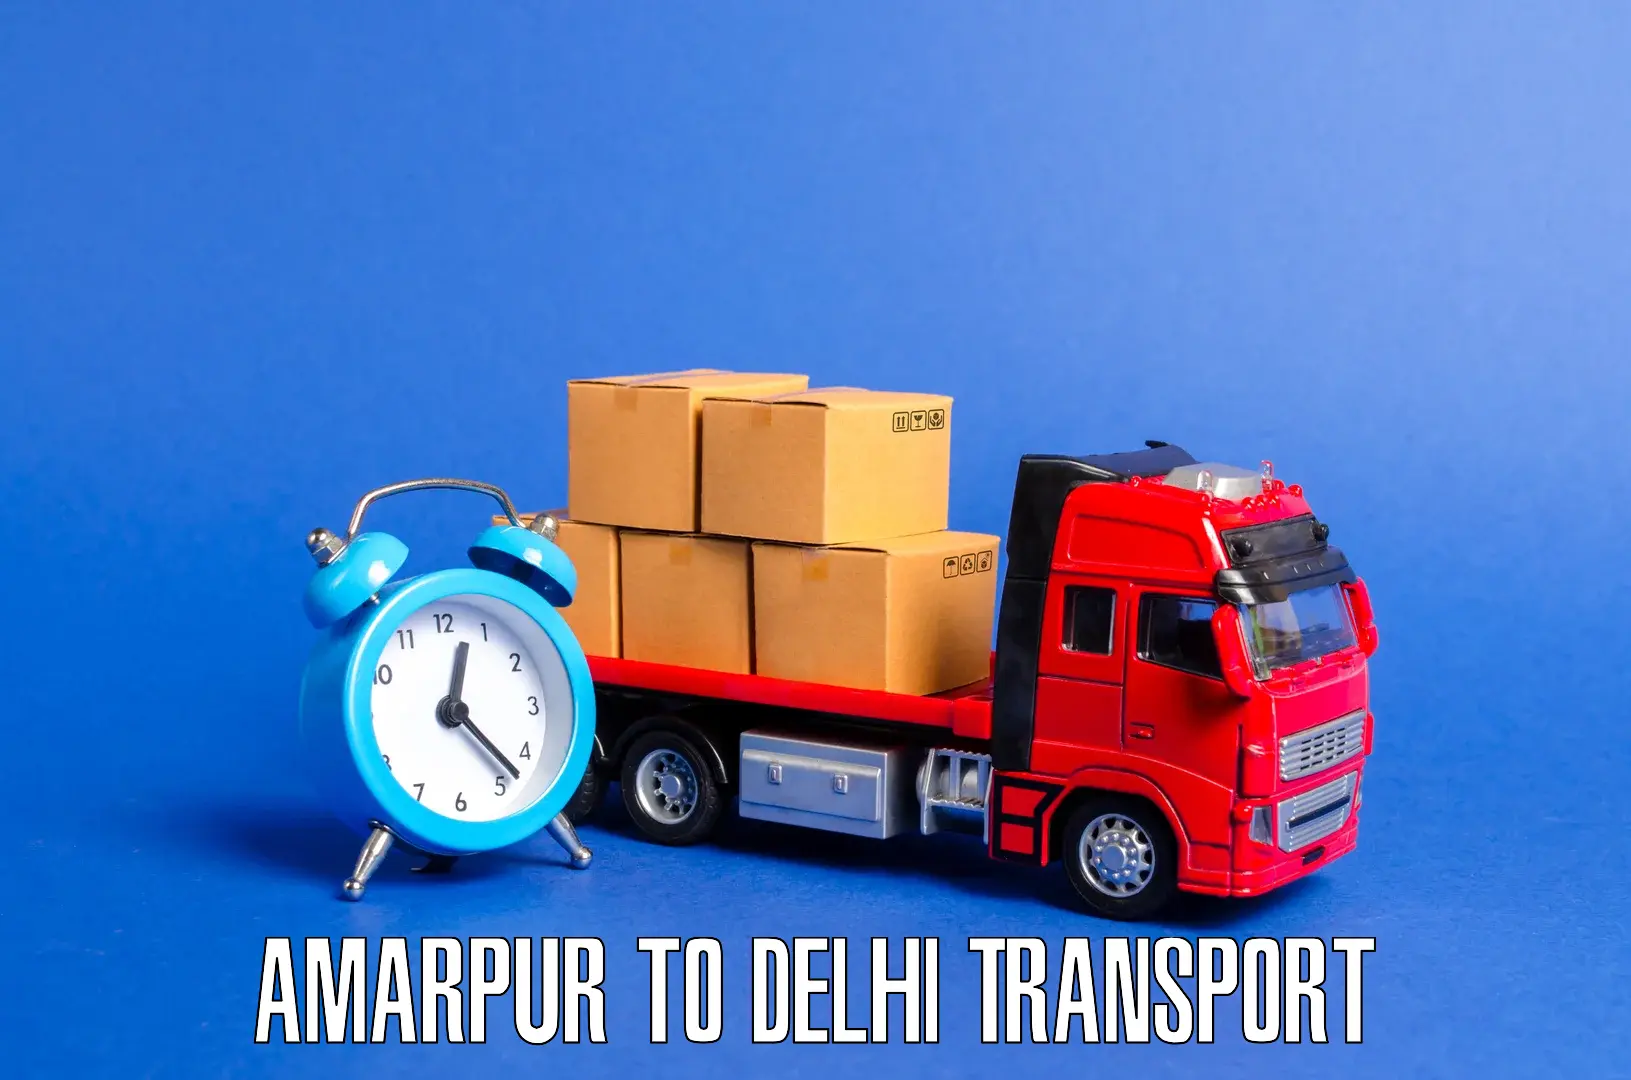 Nearby transport service Amarpur to NCR